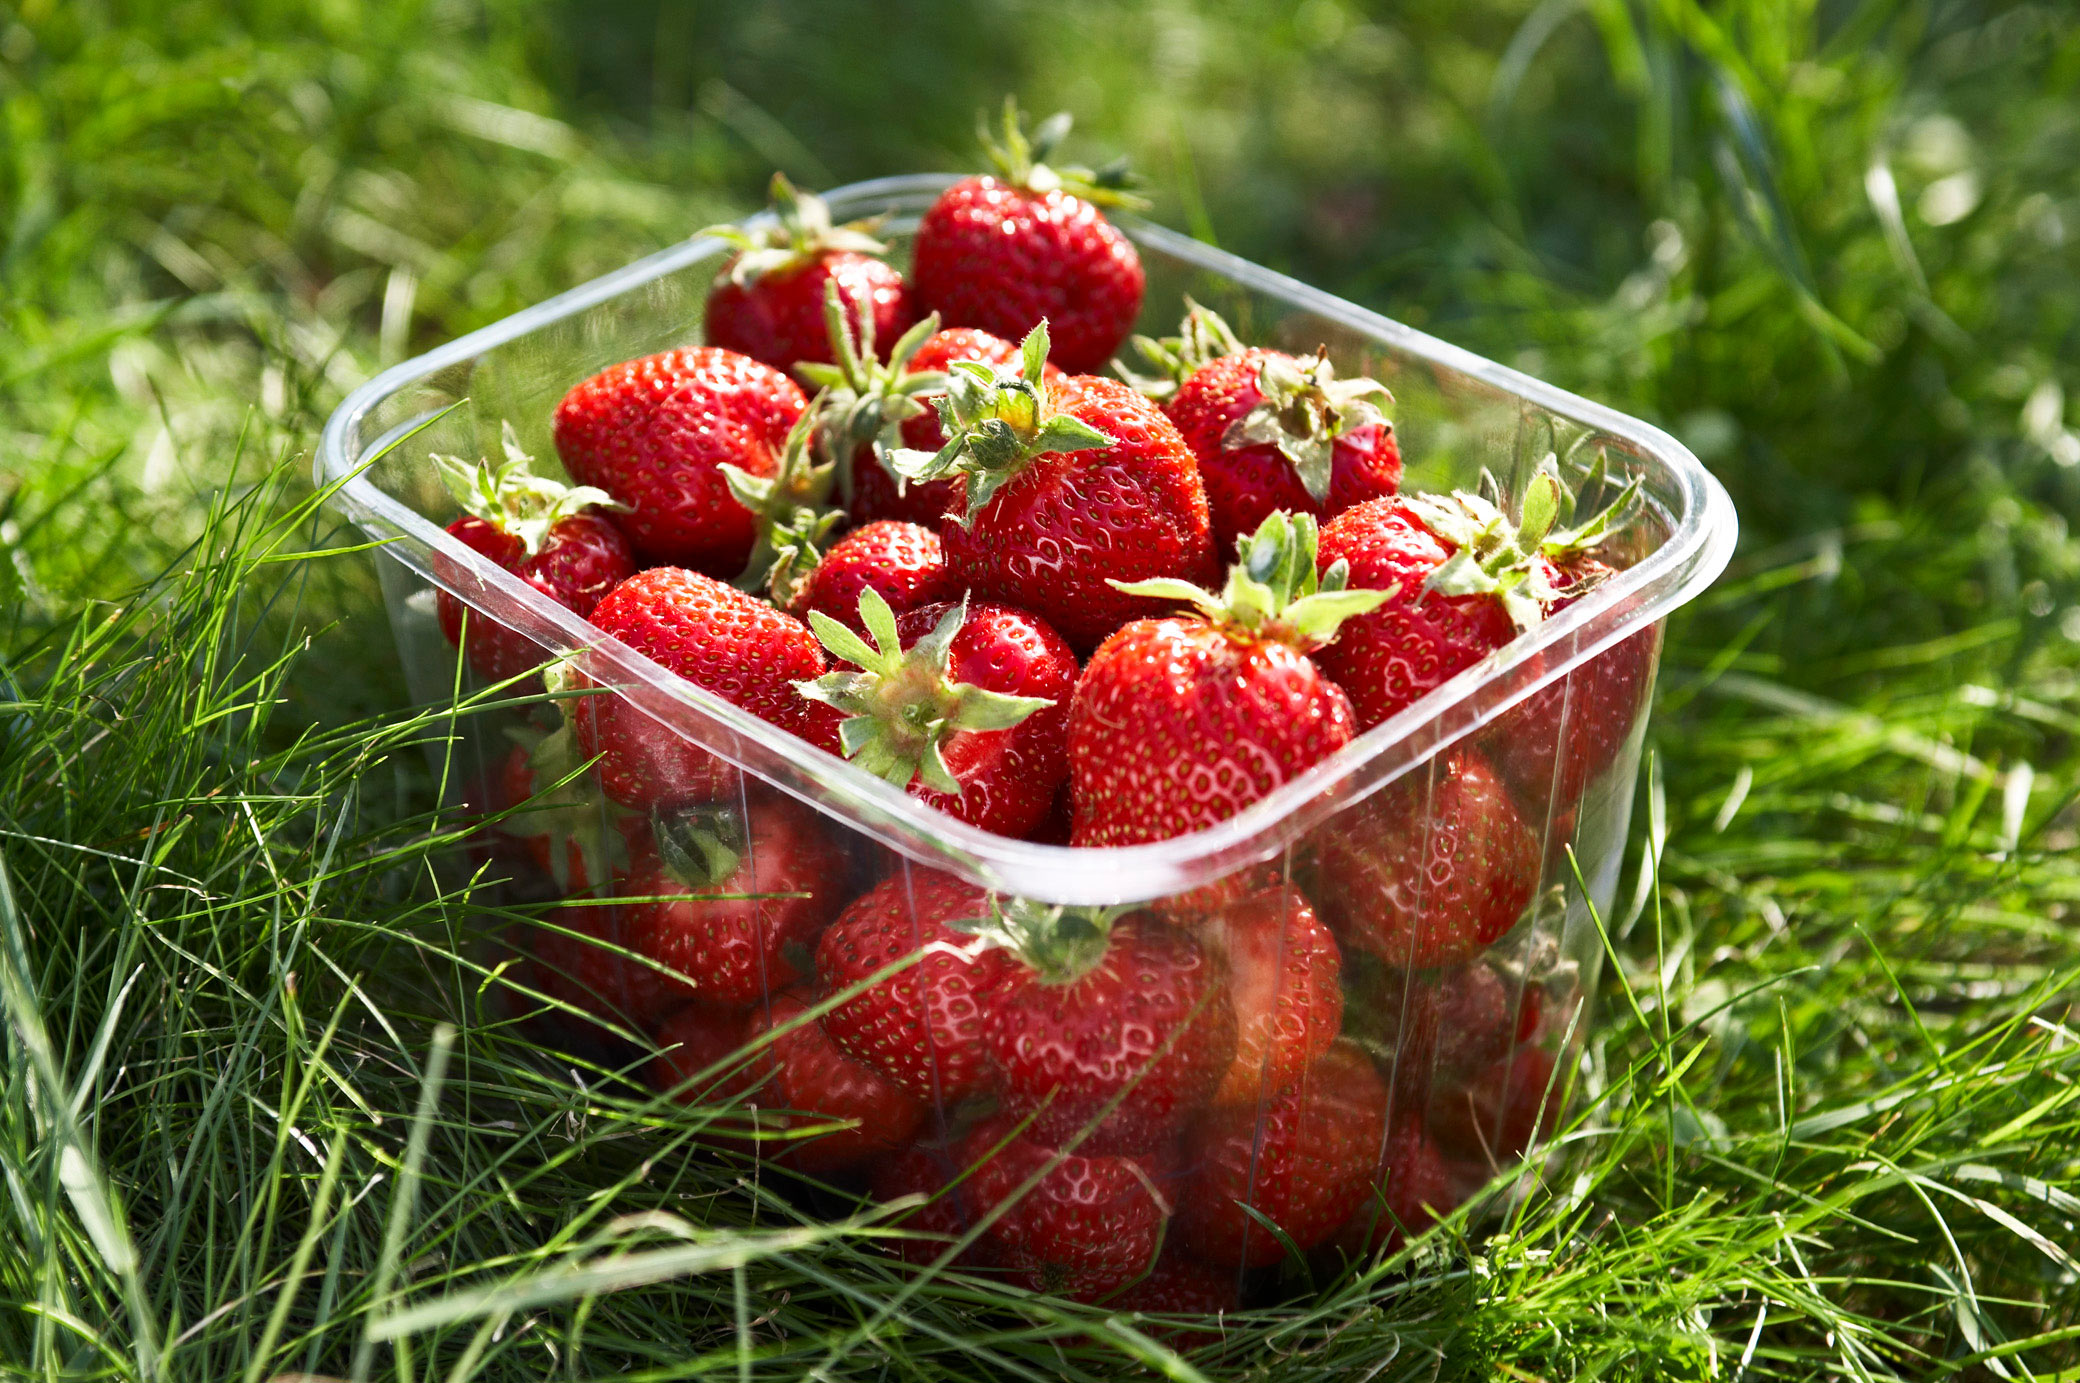 Food photographer surrey uk - a punnet of strawberries in long green grass.  Photographed for marketing.  Sussex, UK